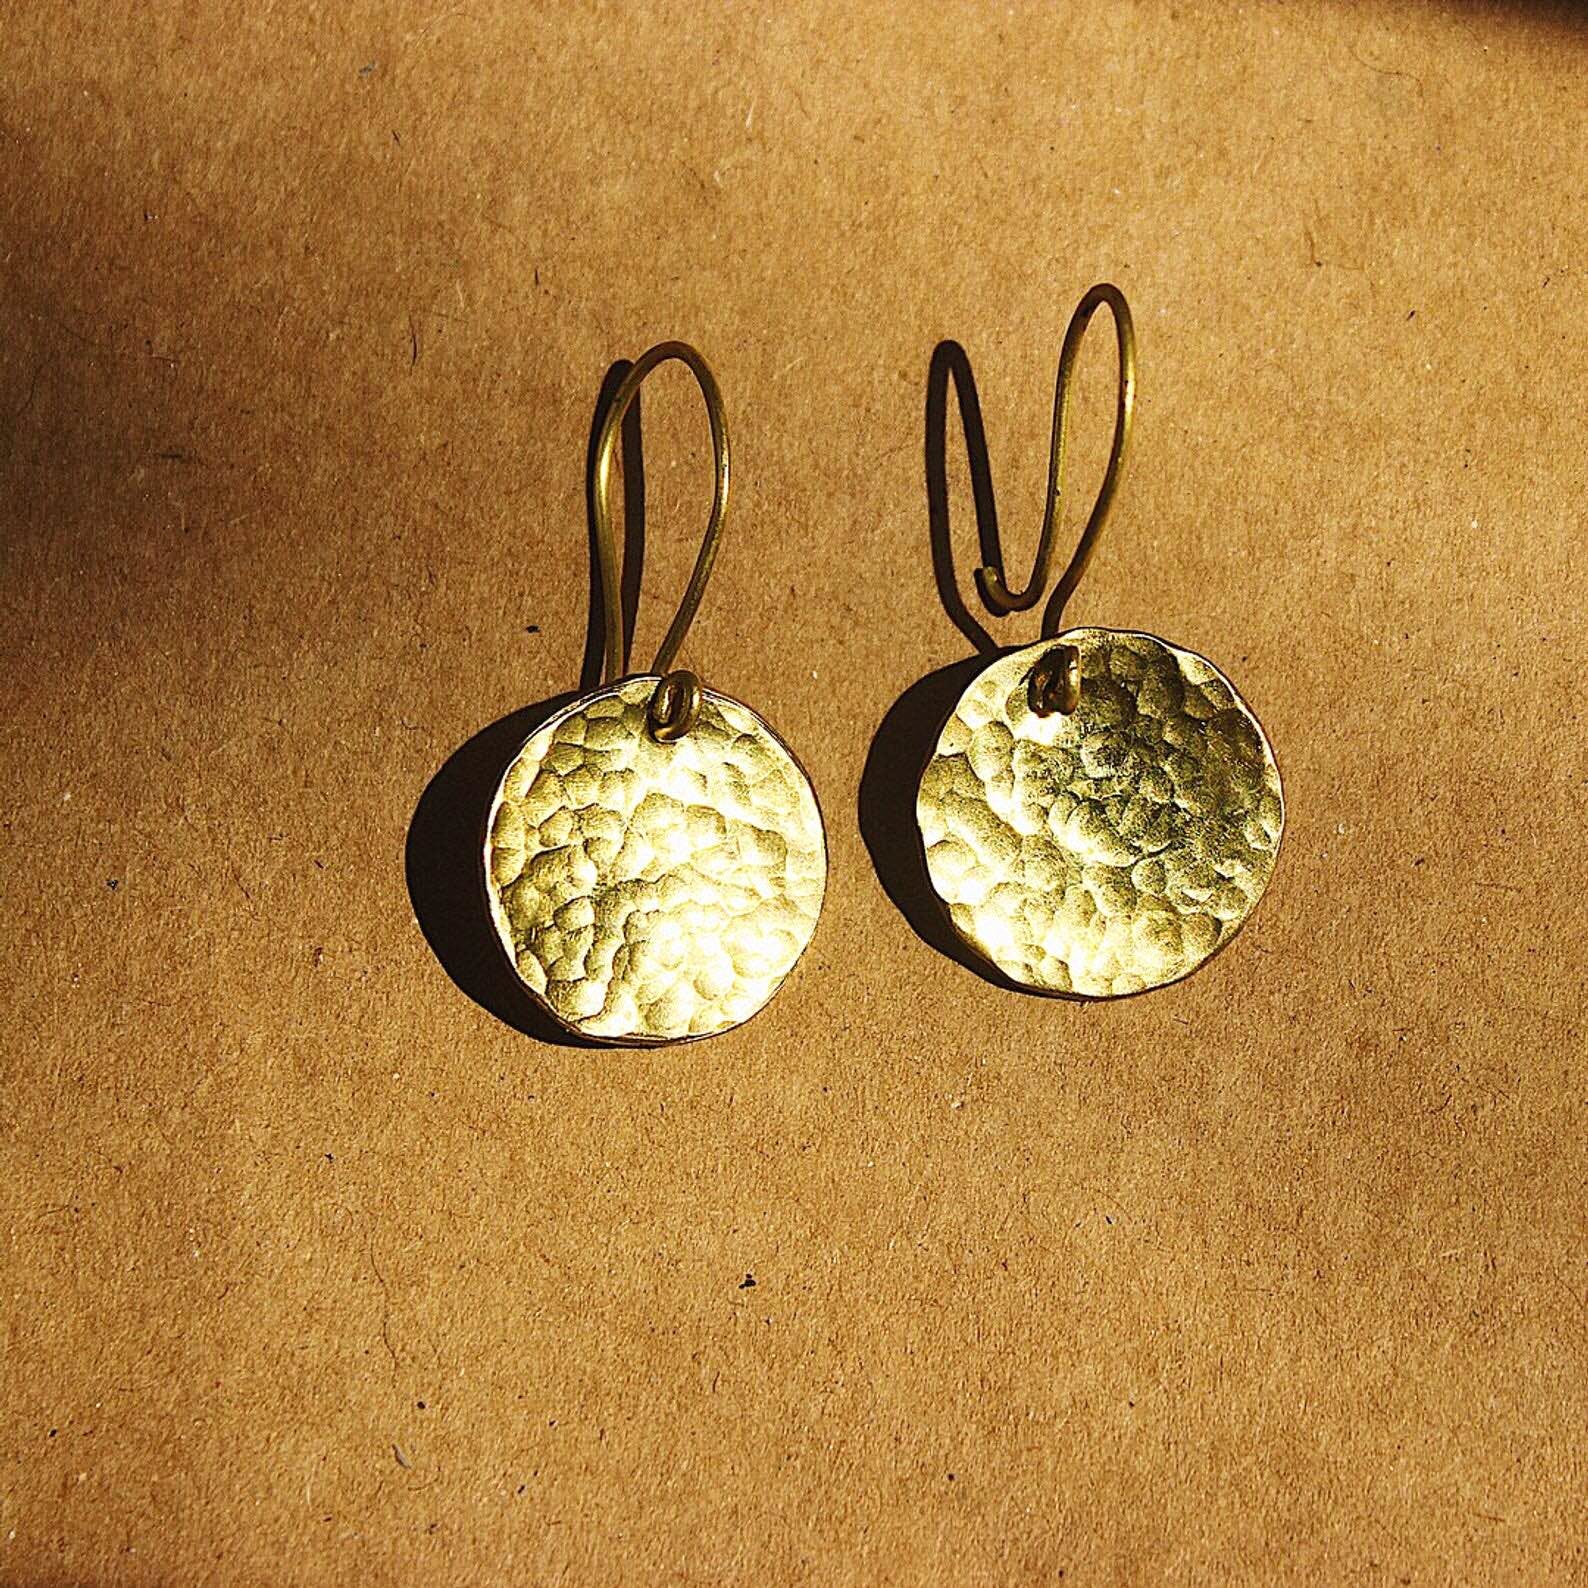 Earrings,Jewellery,Fashion accessory,Body jewelry,Metal,Silver,Ornament,Circle,Gold